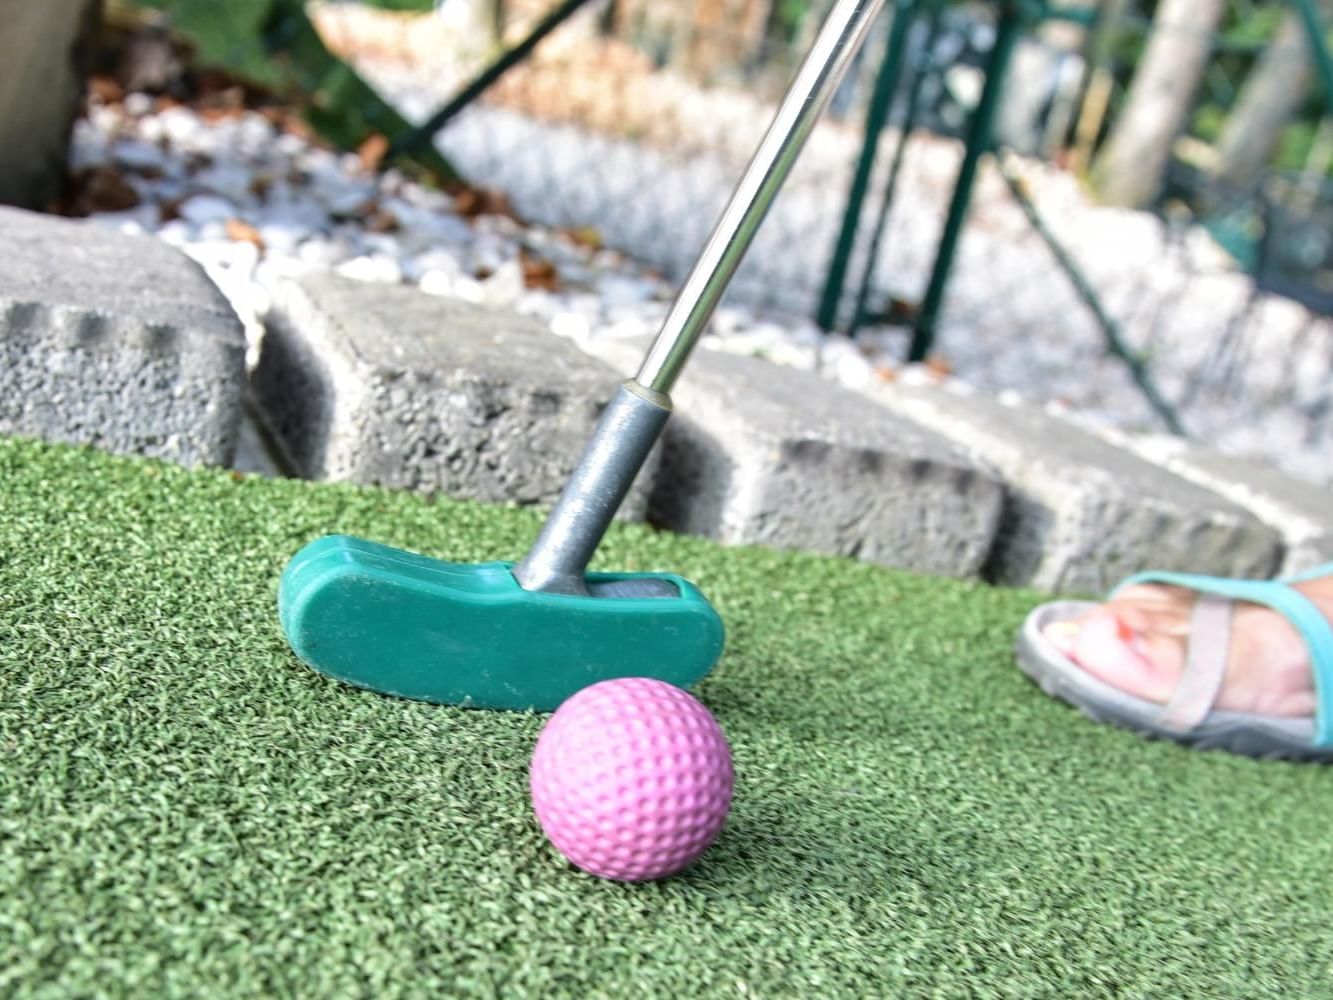 Person playing miniature golf with a pink ball at Wonder Mountain Fun Park near Anchorage by the Sea